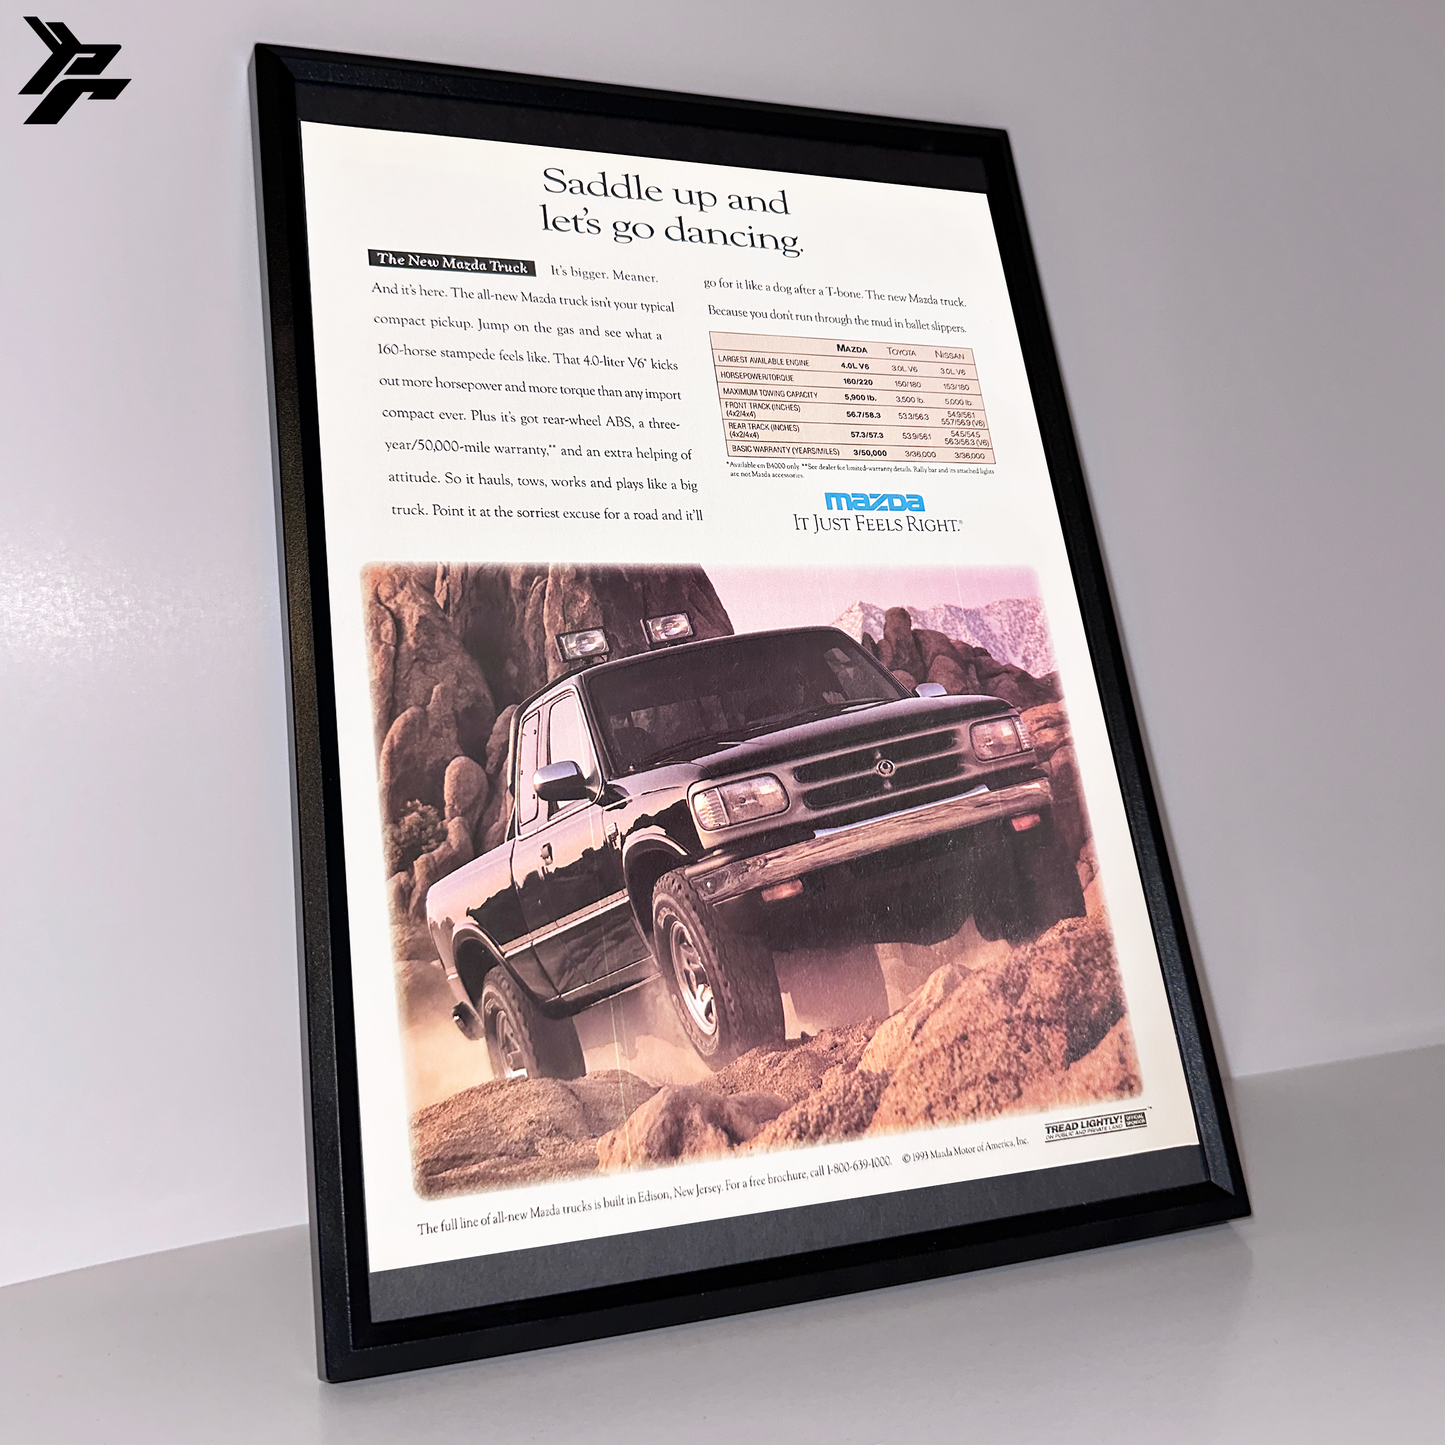 The new Mazda Truck dancing framed ad